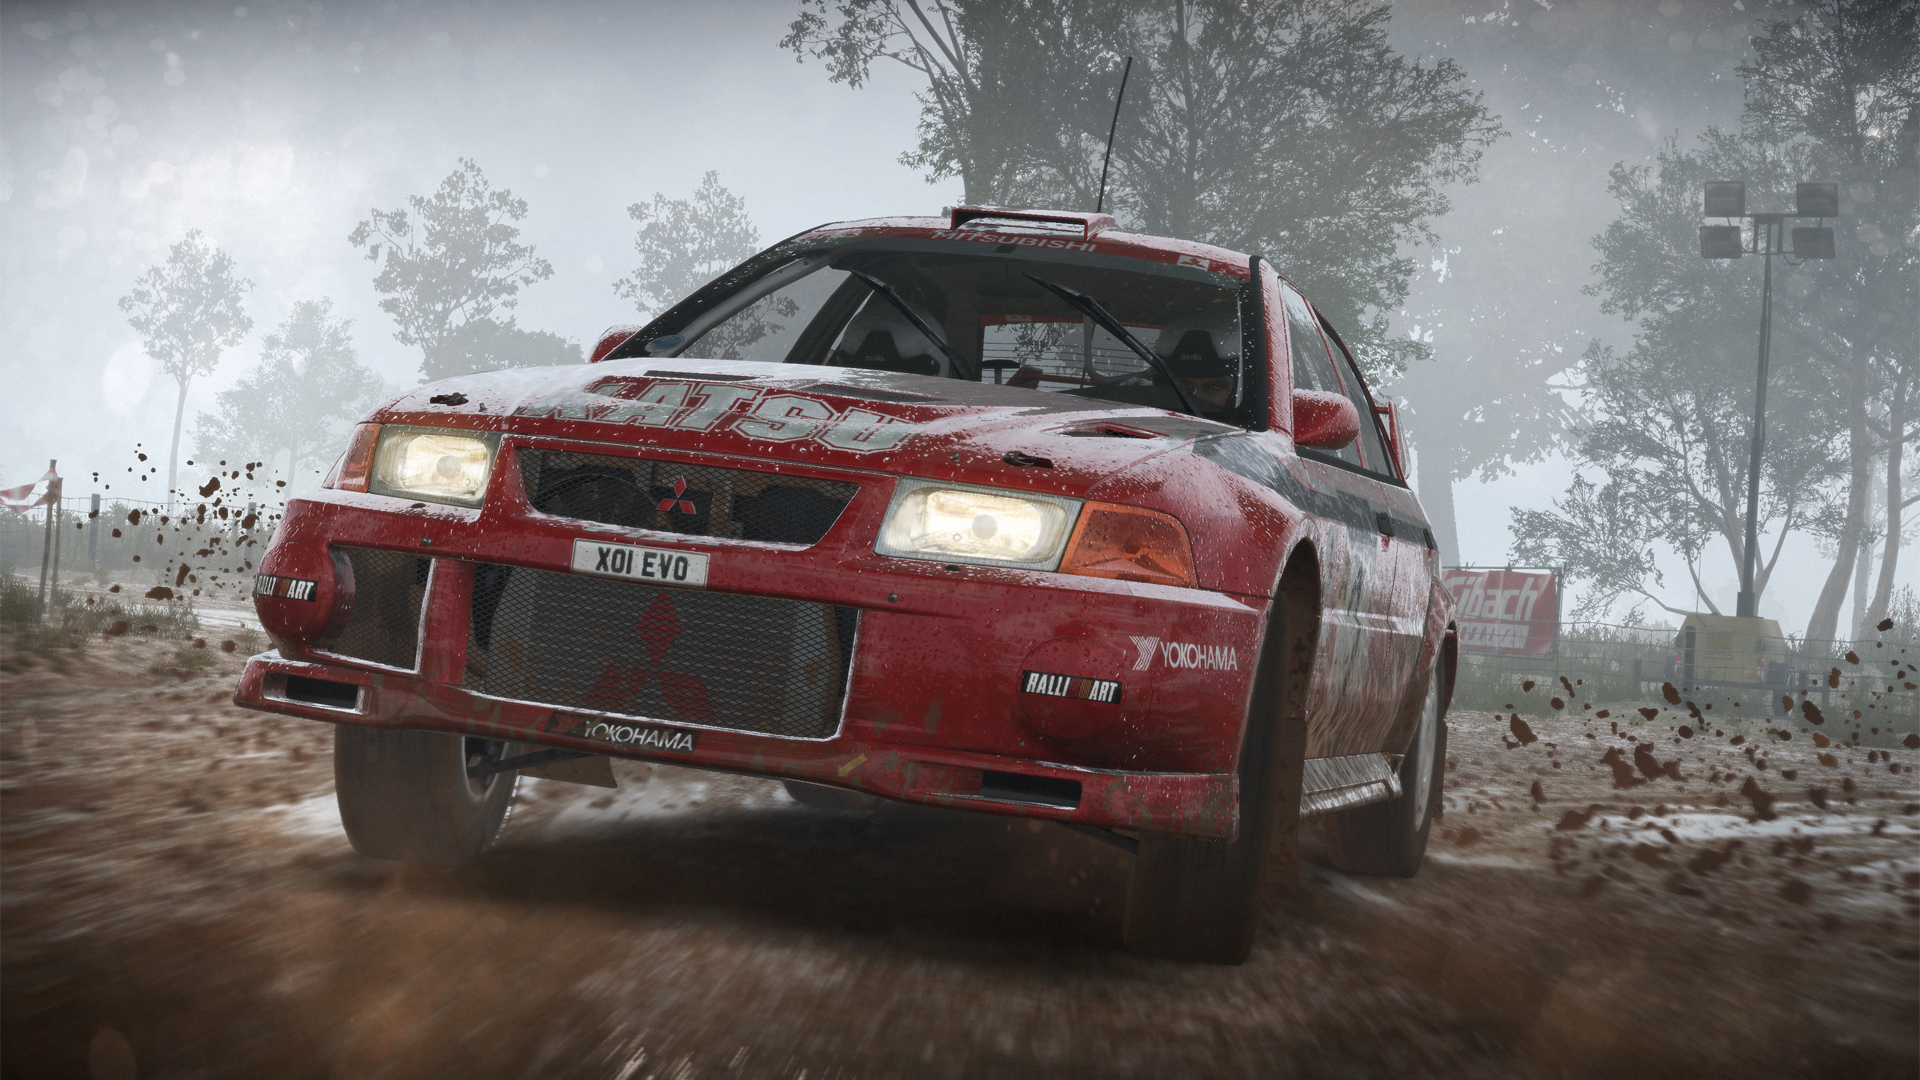 Wallpaper Race game, Dirt 4, red car, front view